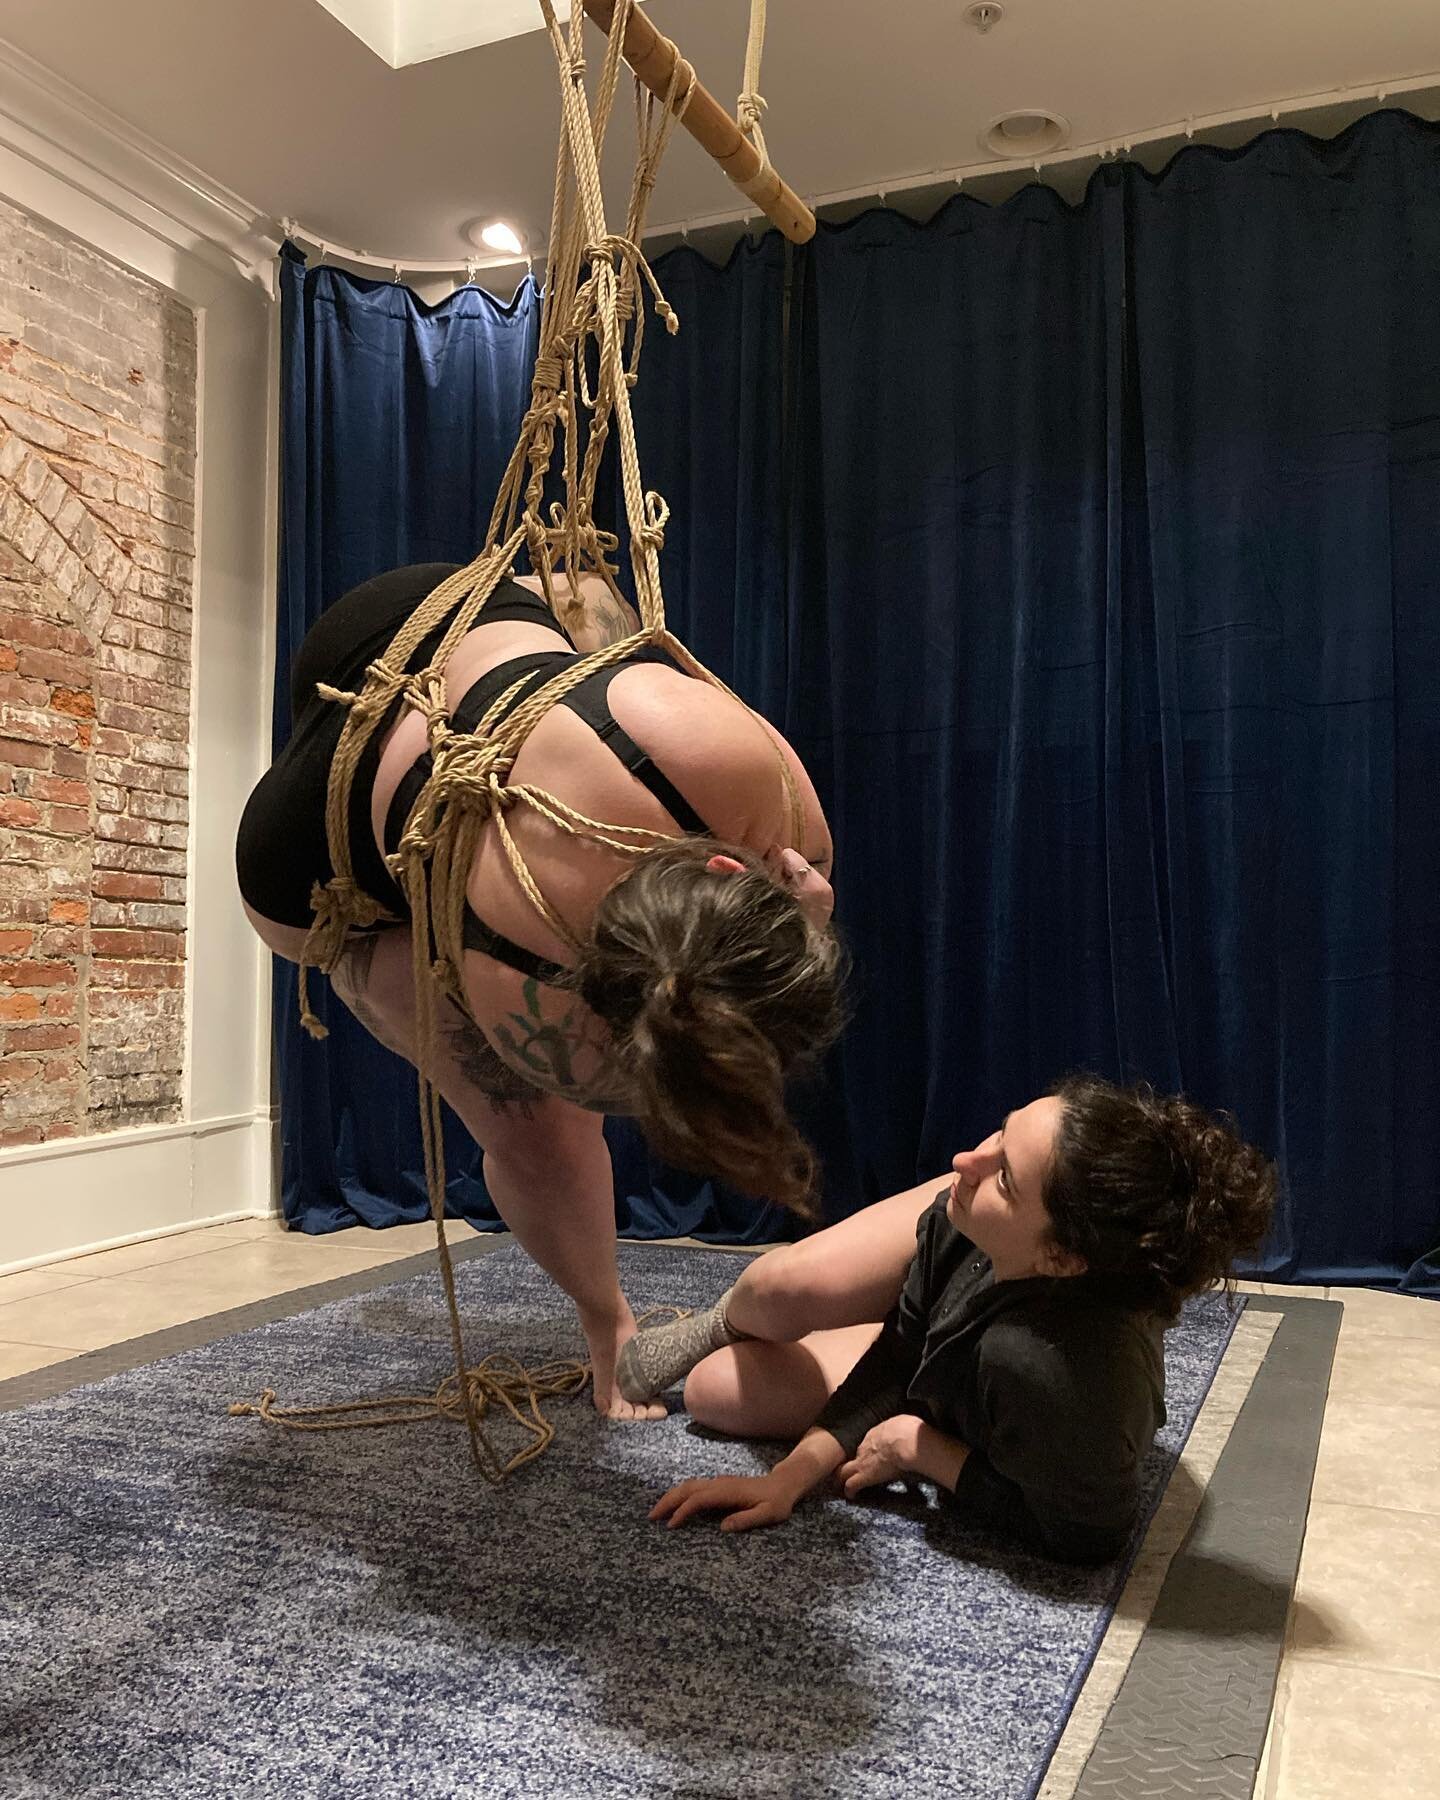 From a recent reunion with @joyfulode2 who can still totally do the damn thing! Thank you for your friendship and letting me tie you! 

📸 @bdslr 

#shibari #bondage #ropebondage #alltiedup #ropebottom